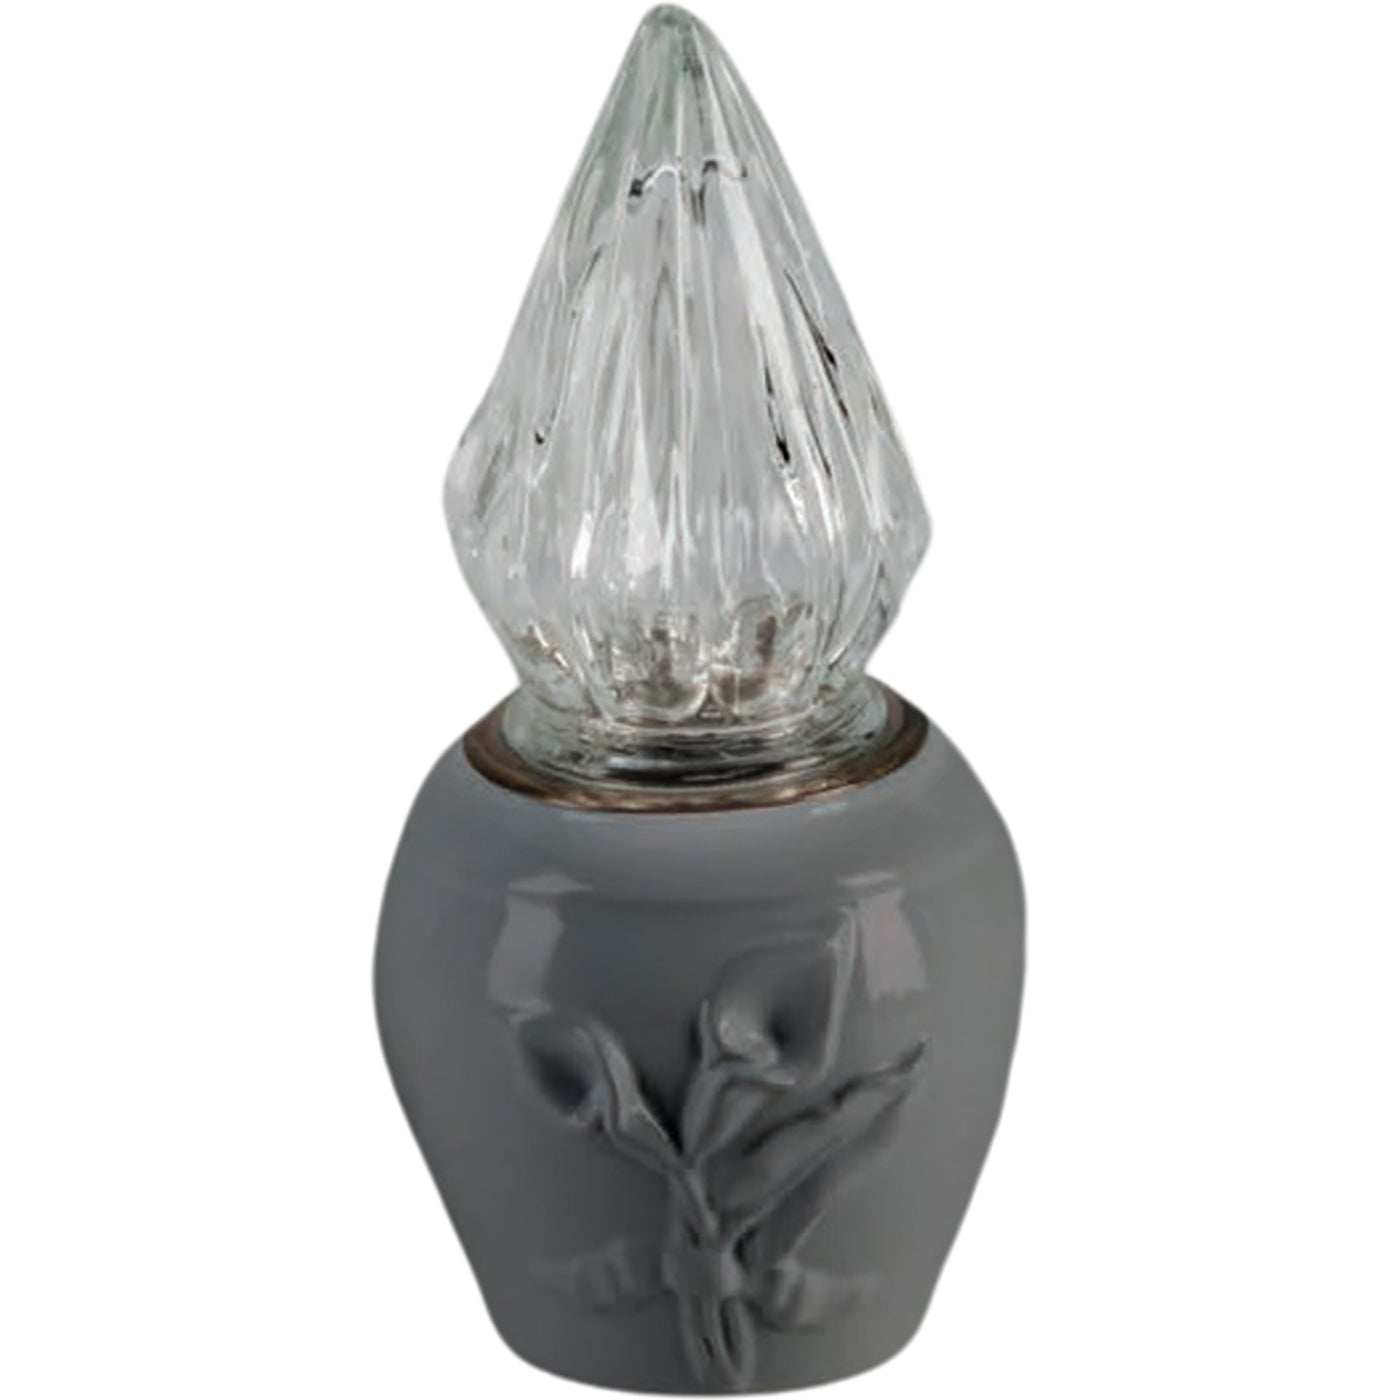 Grave light Calla gray 10x10cm - 3.9x3.9in In gray porcelain, ground attached CAL164T/G